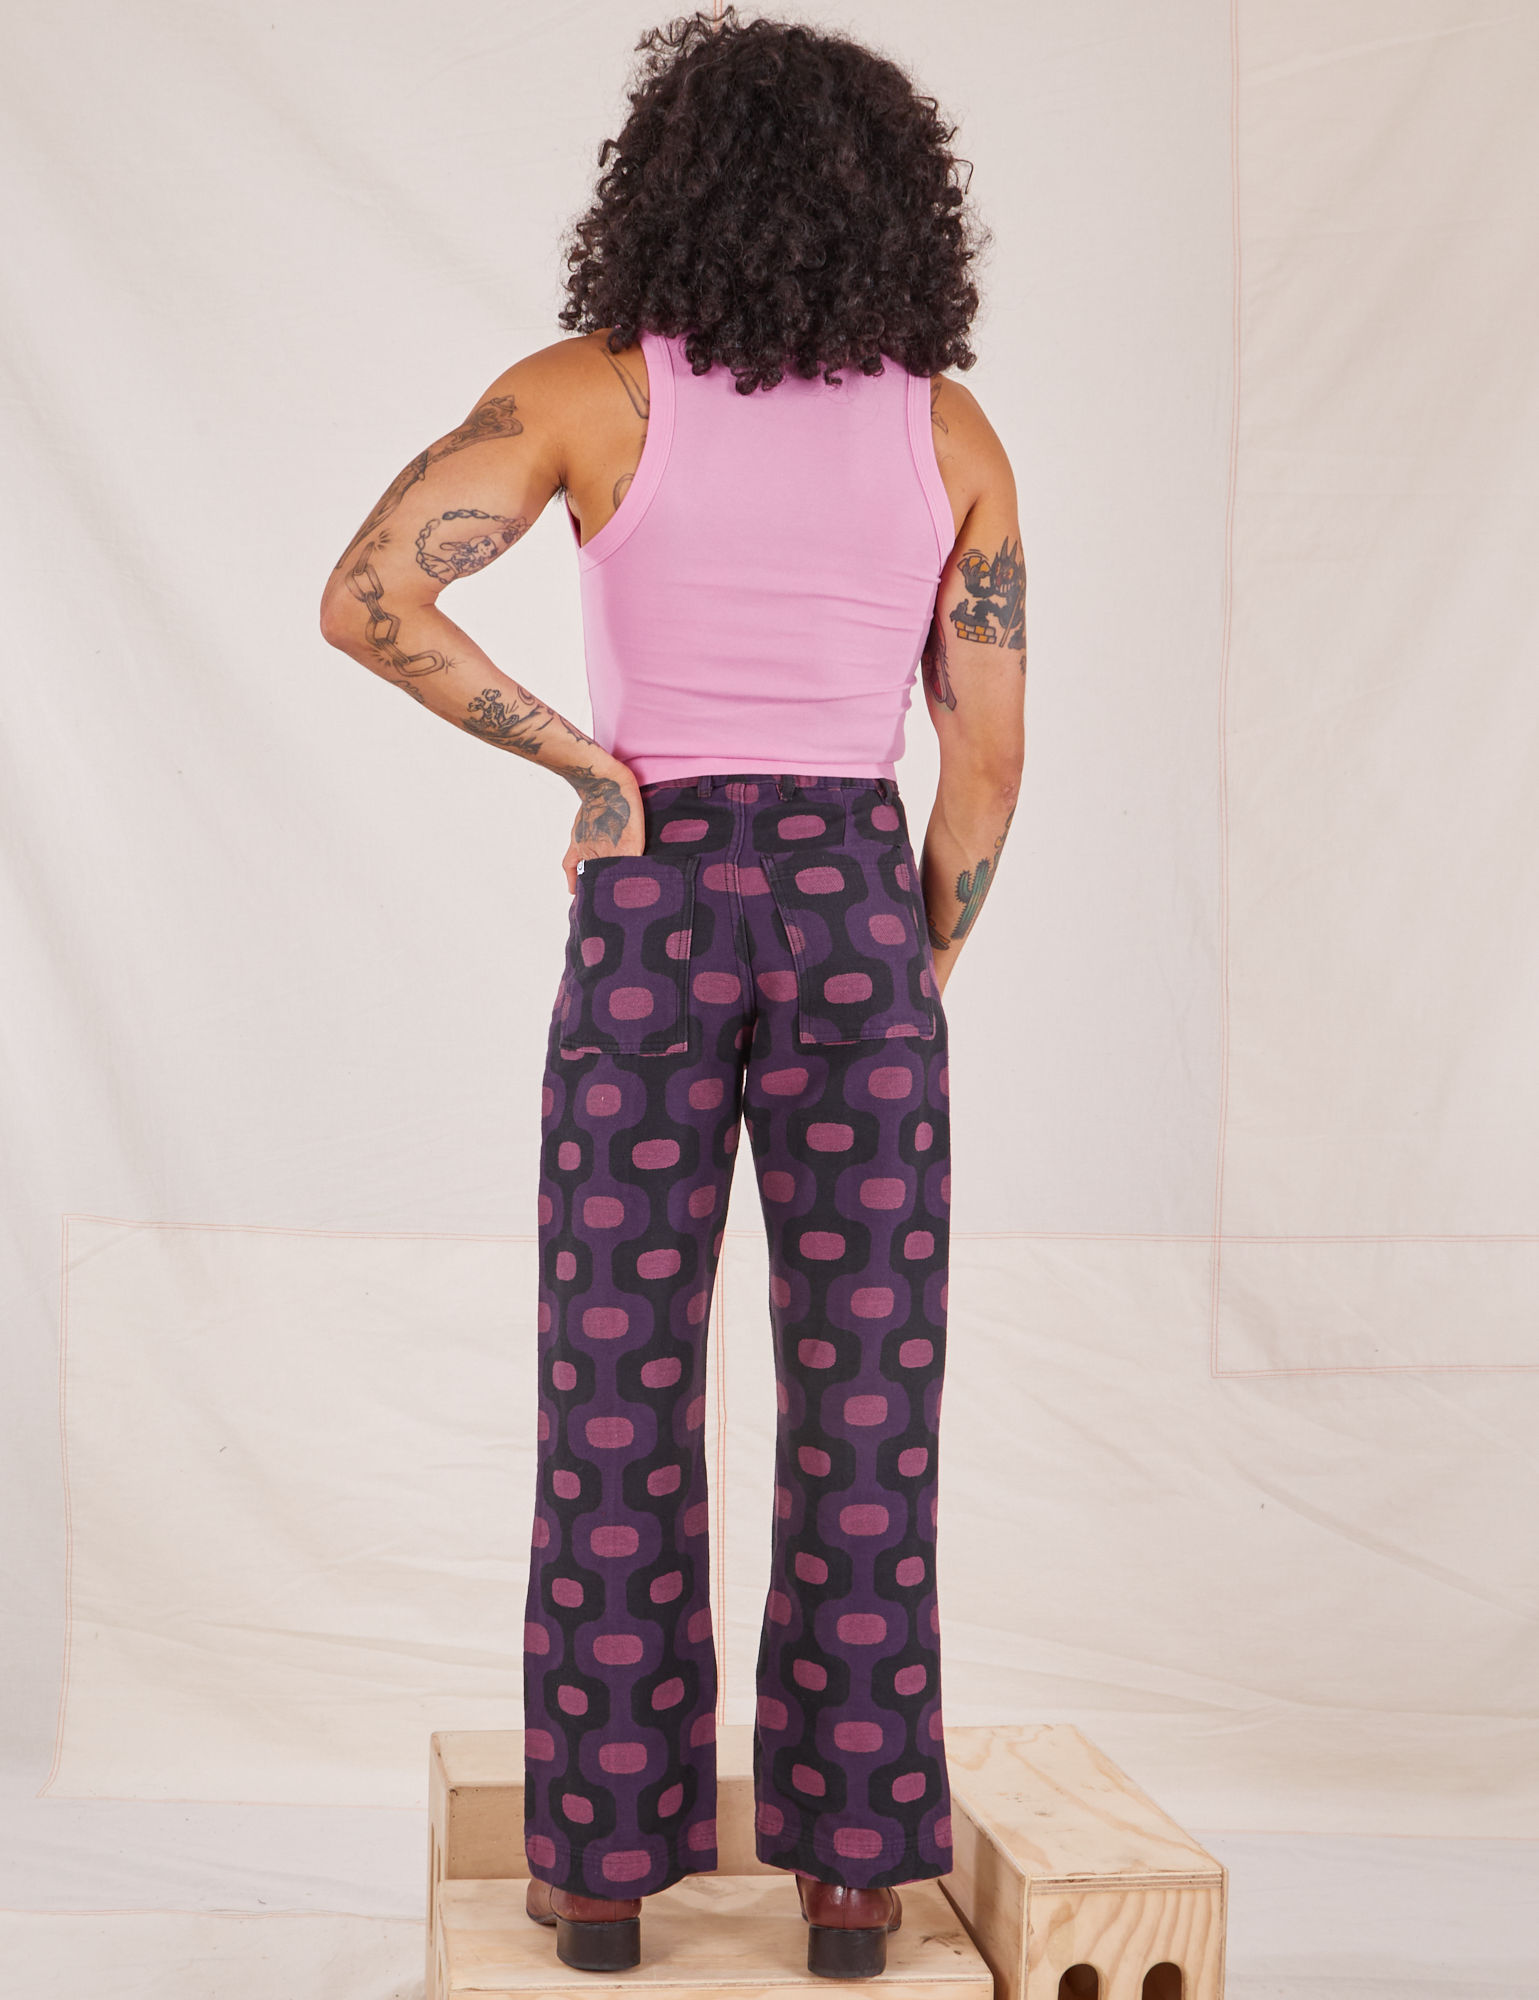 Back view of Western Pants in Purple Tile Jacquard and bubblegum pink Cropped Tank Top on Jesse